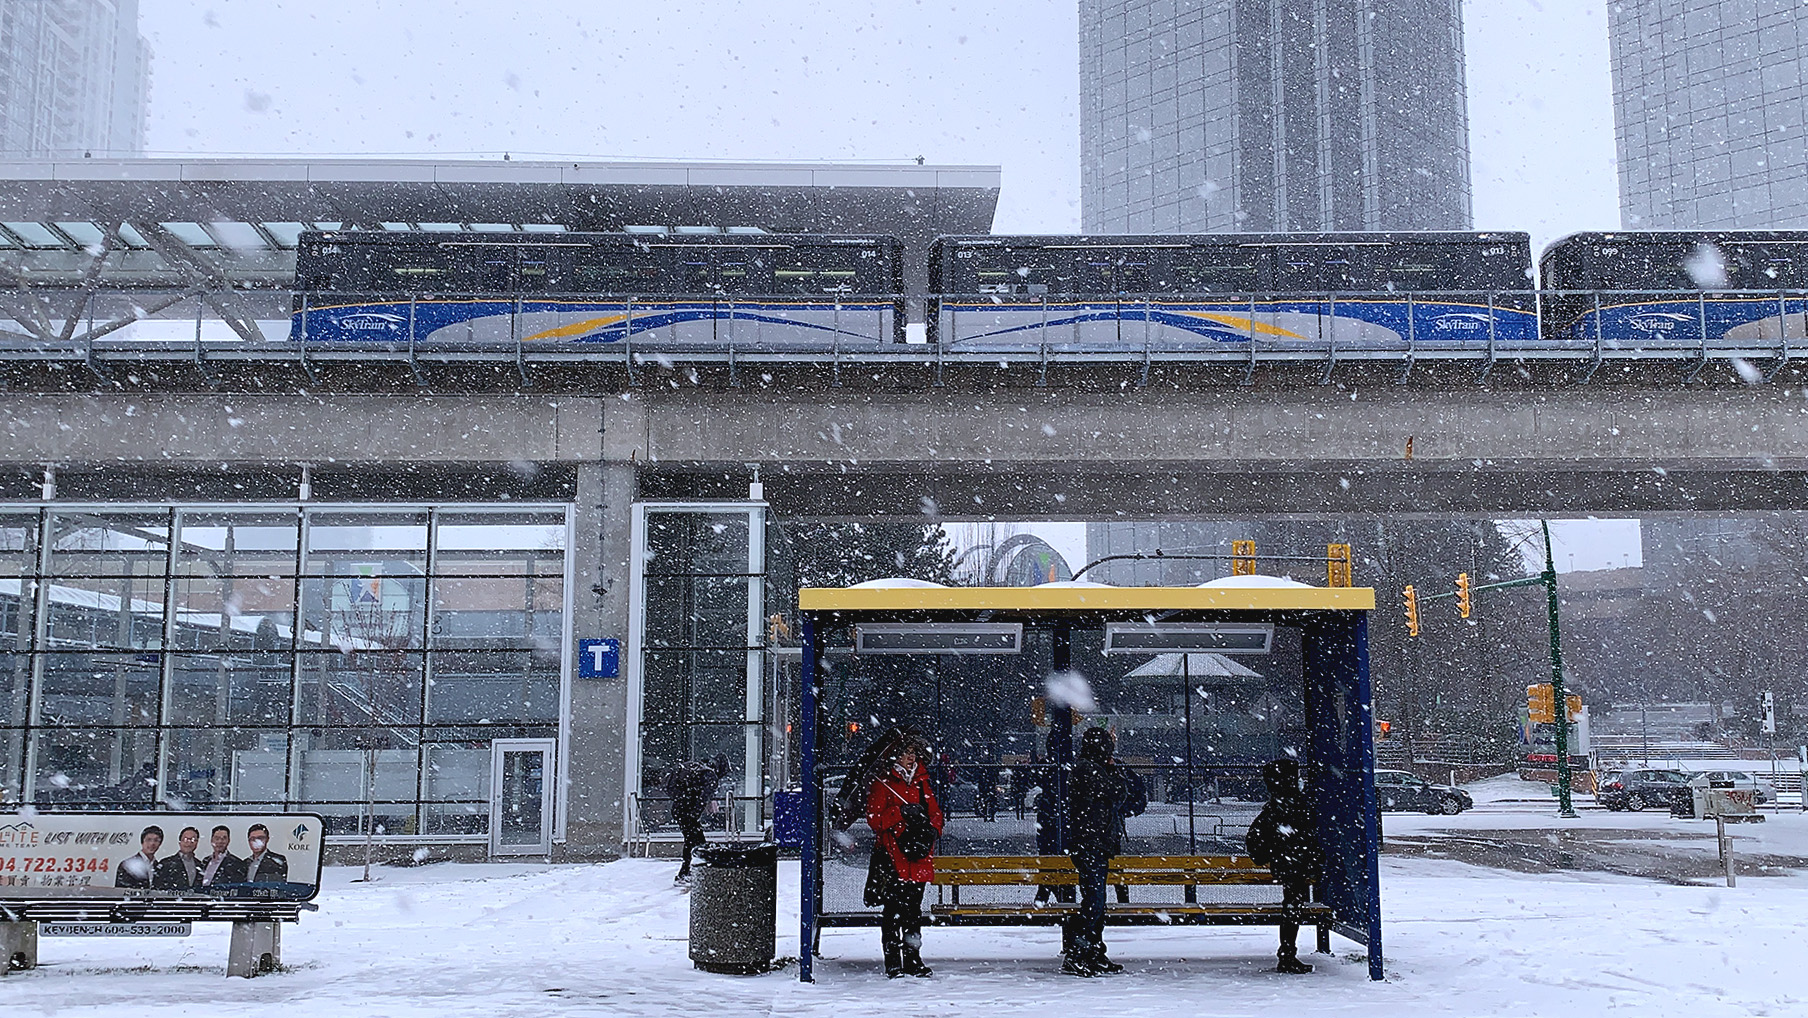 Commuters waiting at a bus stop while SkyTrain passes by at Metrotown Station